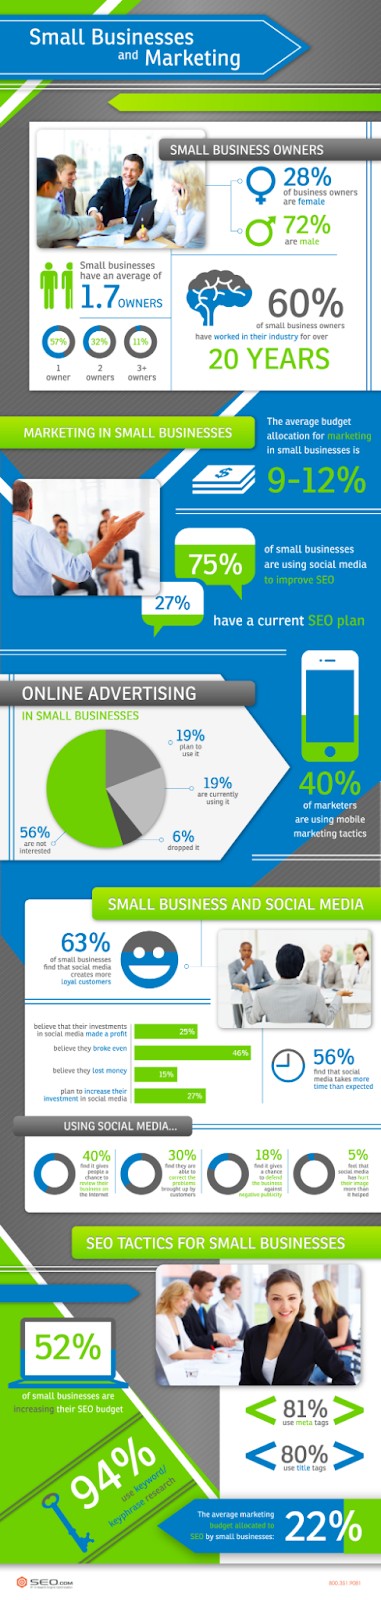 Small business marketing infographic.